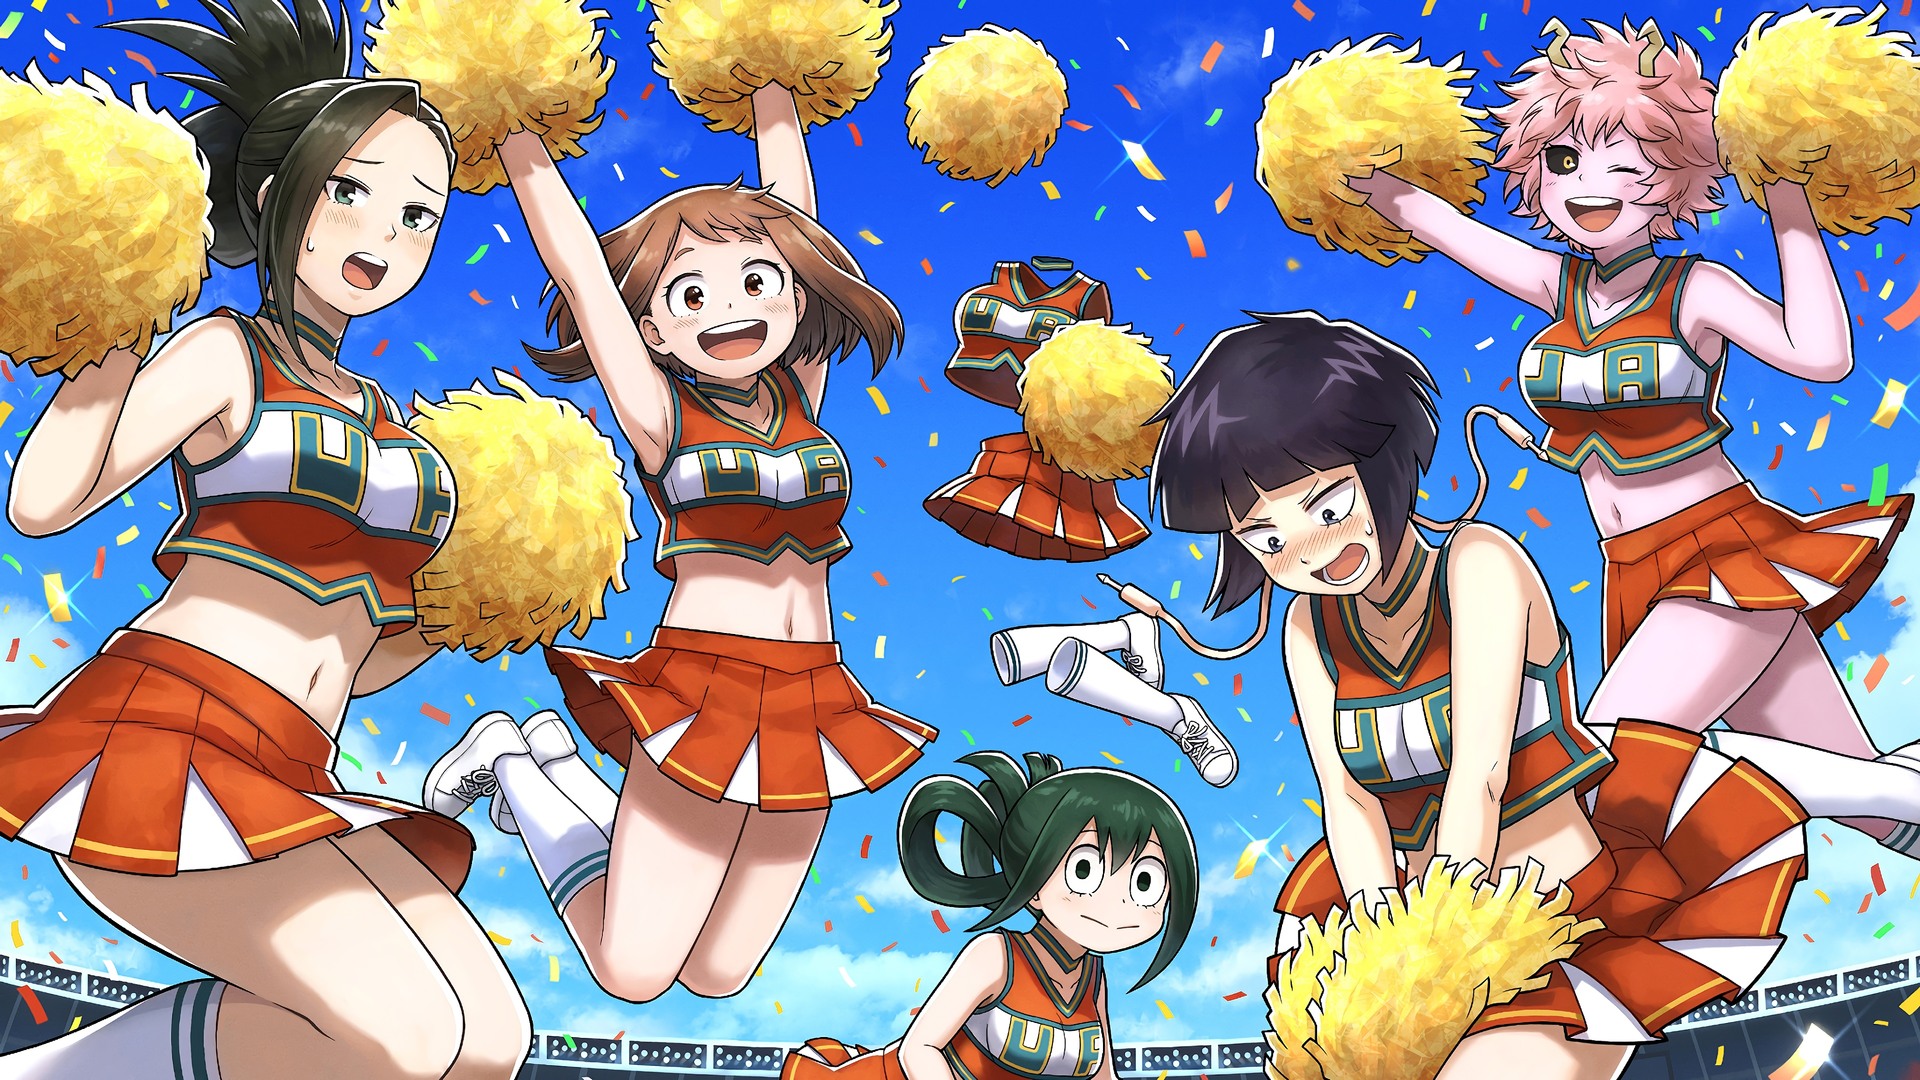 The girls of My Hero Academia in their sports festival cheerleading outfits.